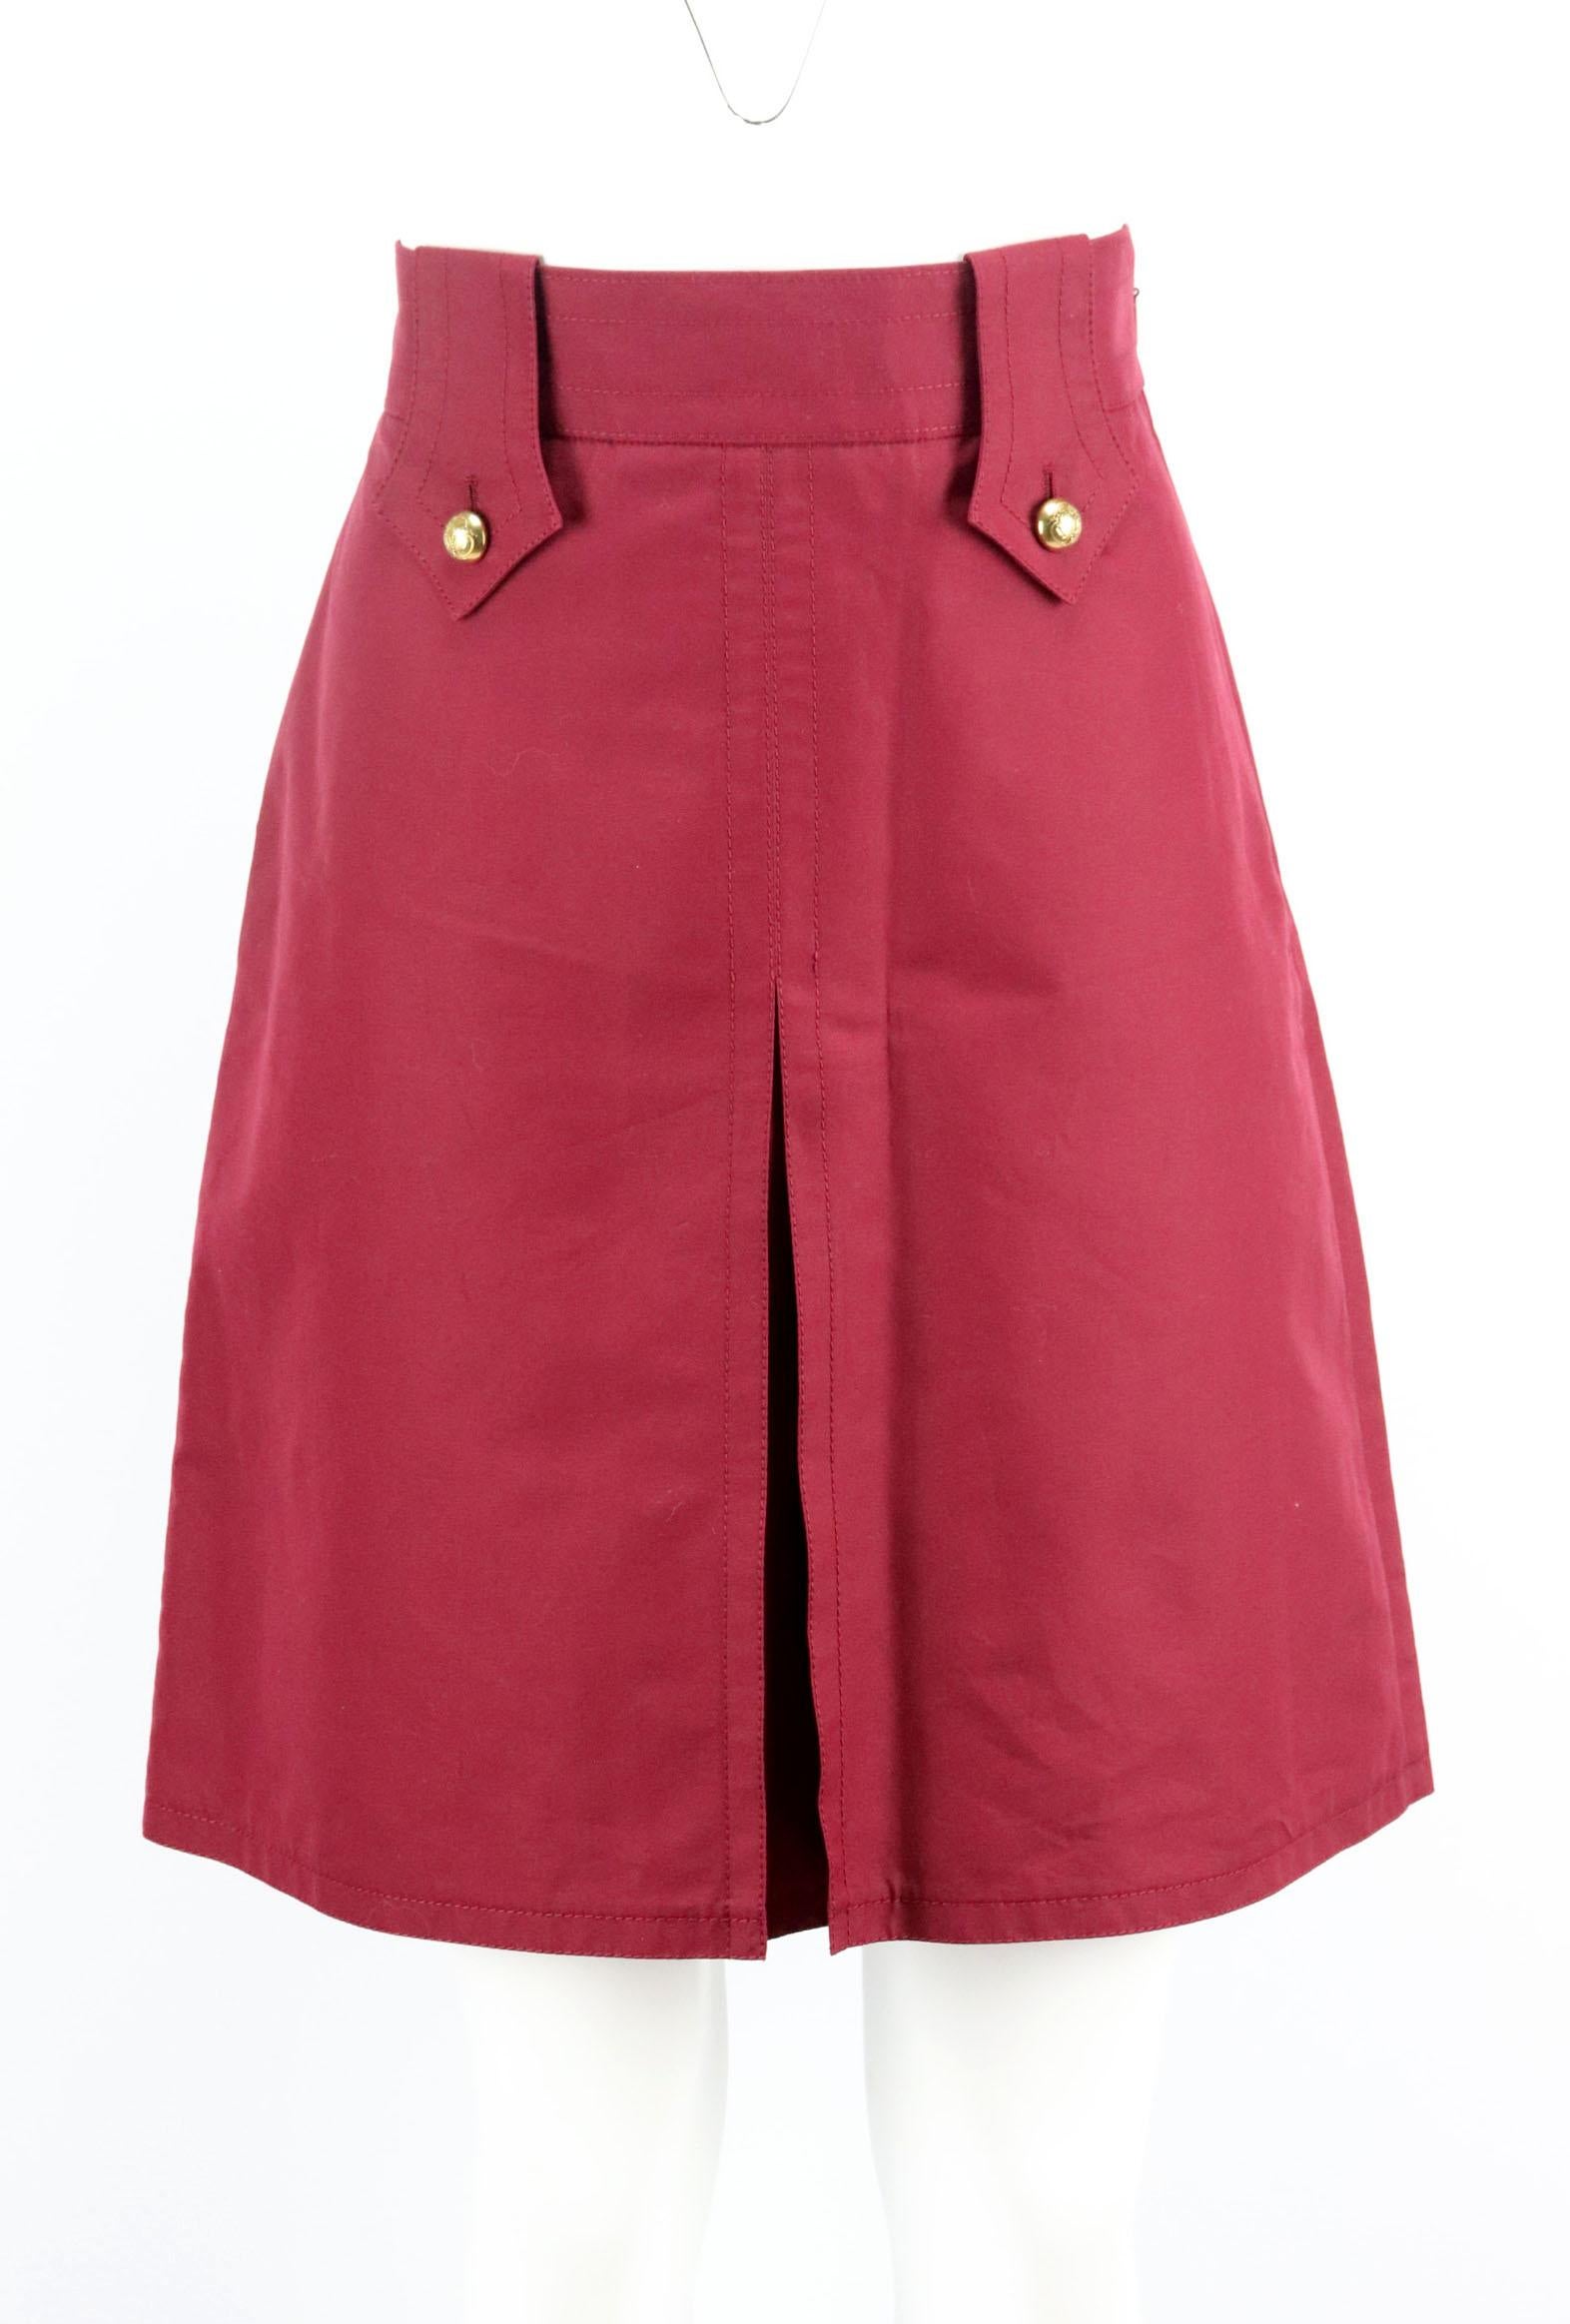 Recalling styles from the '60s, Gucci's retro skirt is made from cotton in a structured silhouette, it's embellished with decorative medallion buttons at the waist.
Burgundy cotton.
Concealed zip and hook fastening at side.
100% Cotton.

Size: IT 44